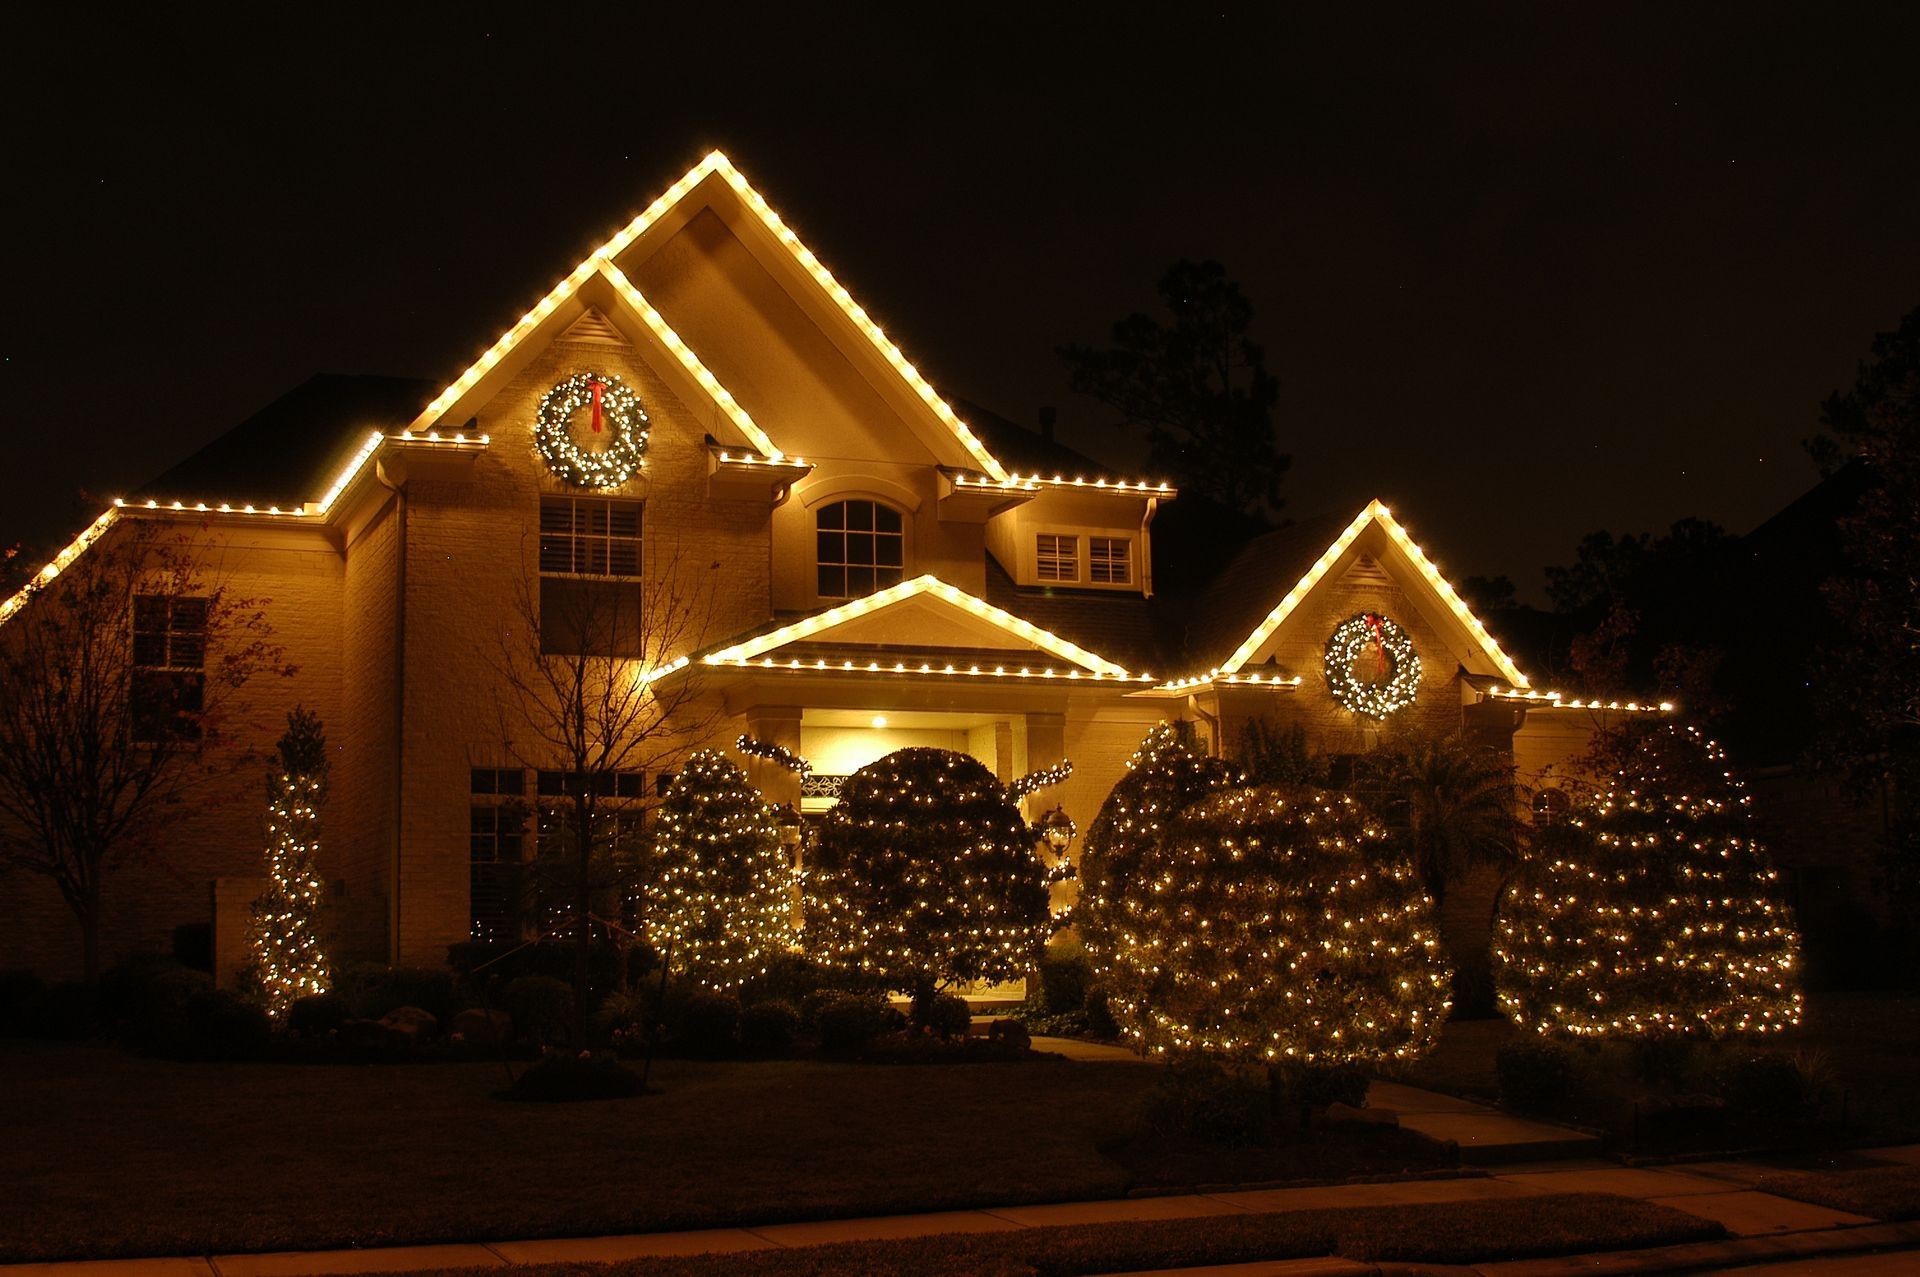 A house decorated with christmas lights and wreaths at night